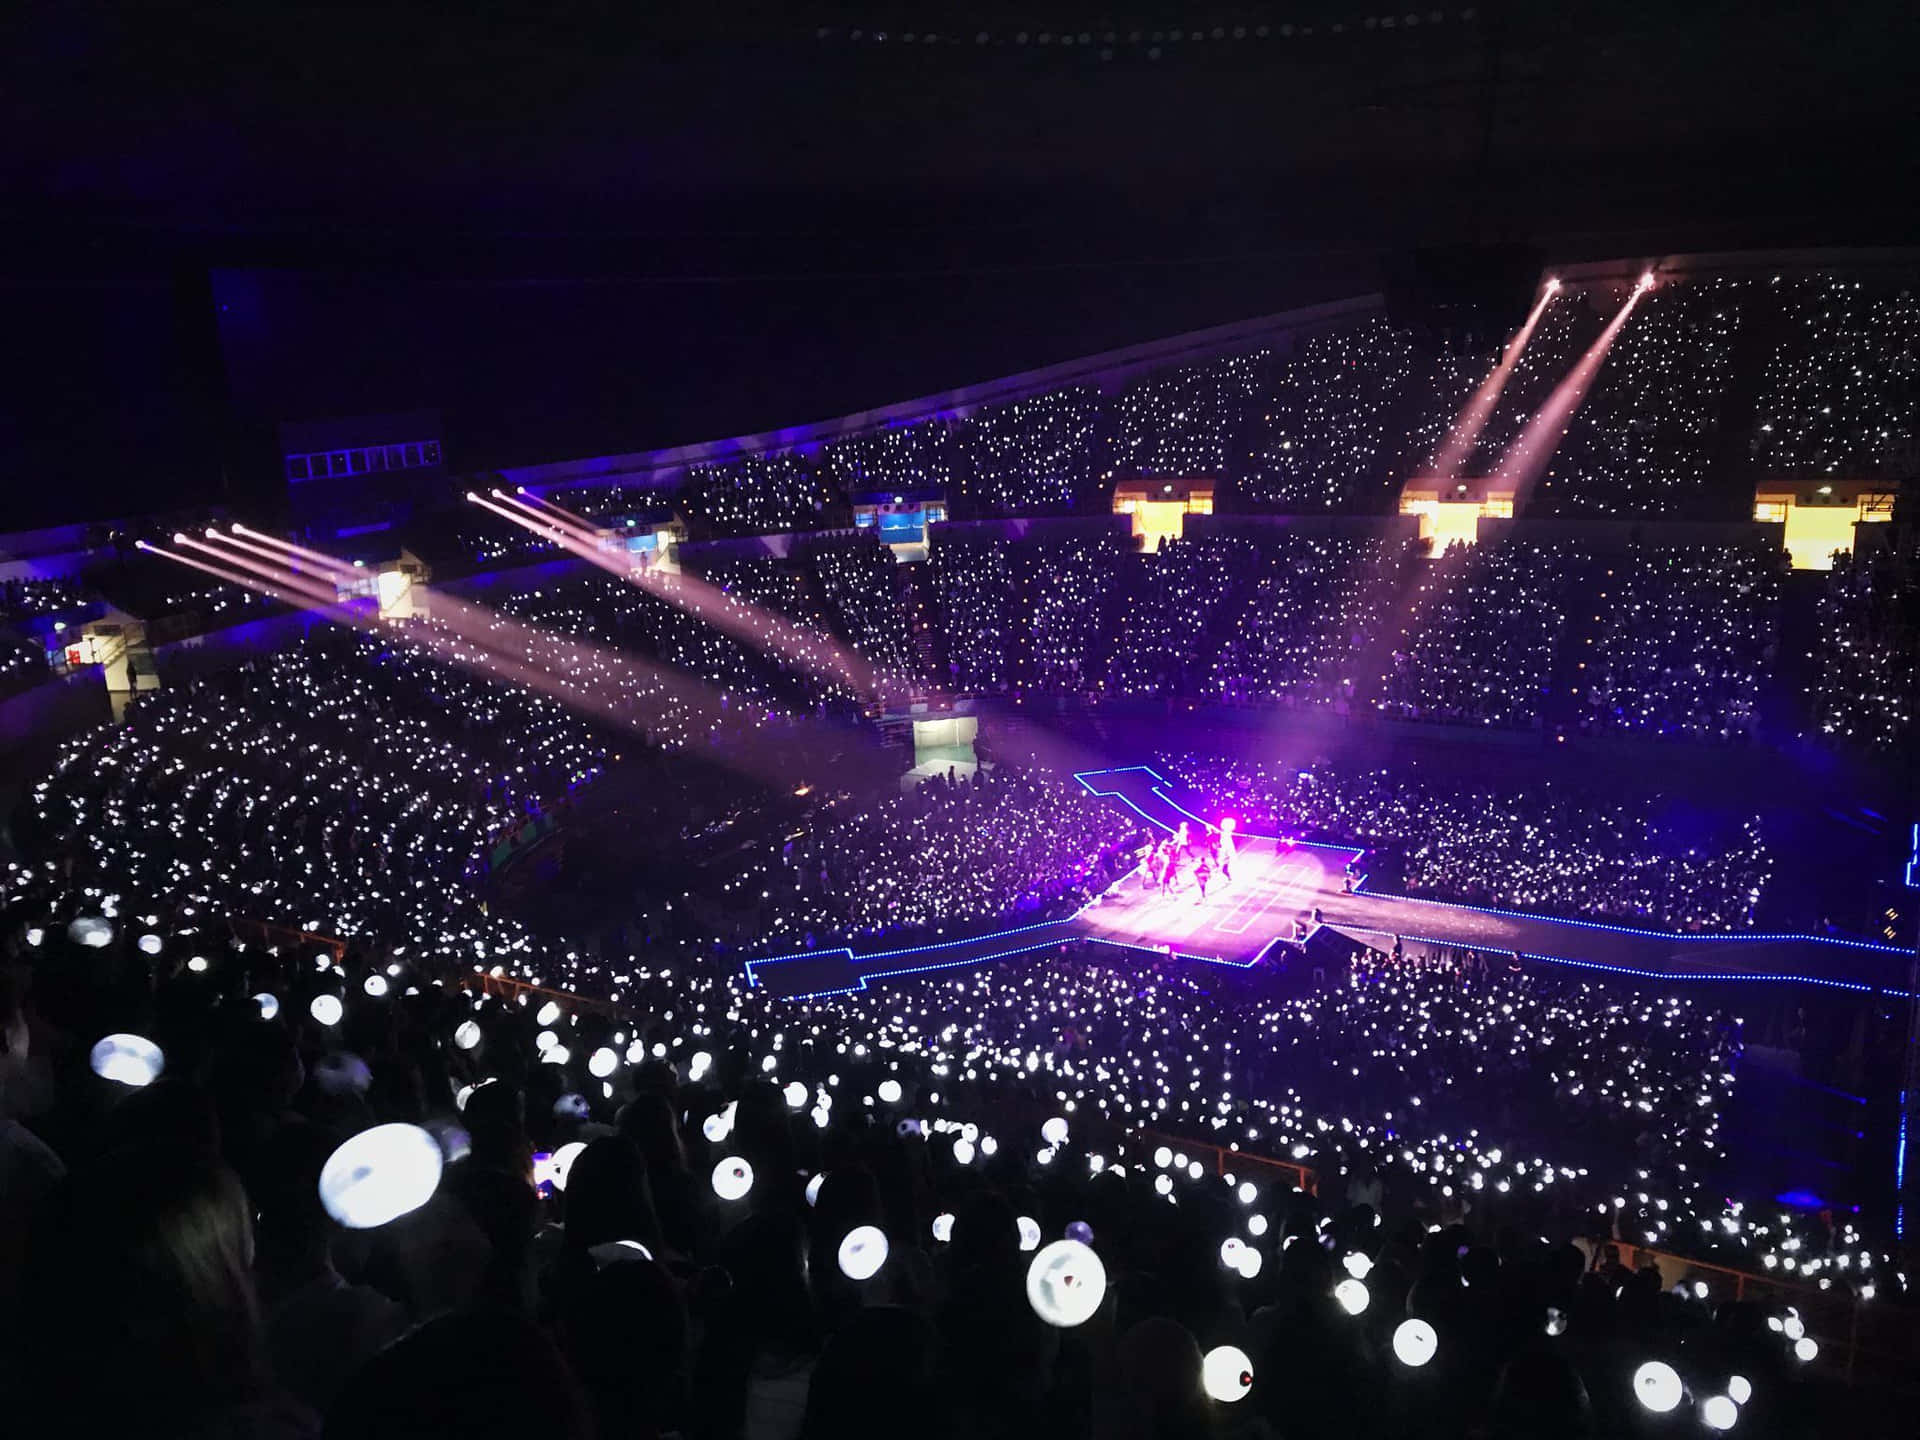 BTS gives an amazing performance at their sold out concert.